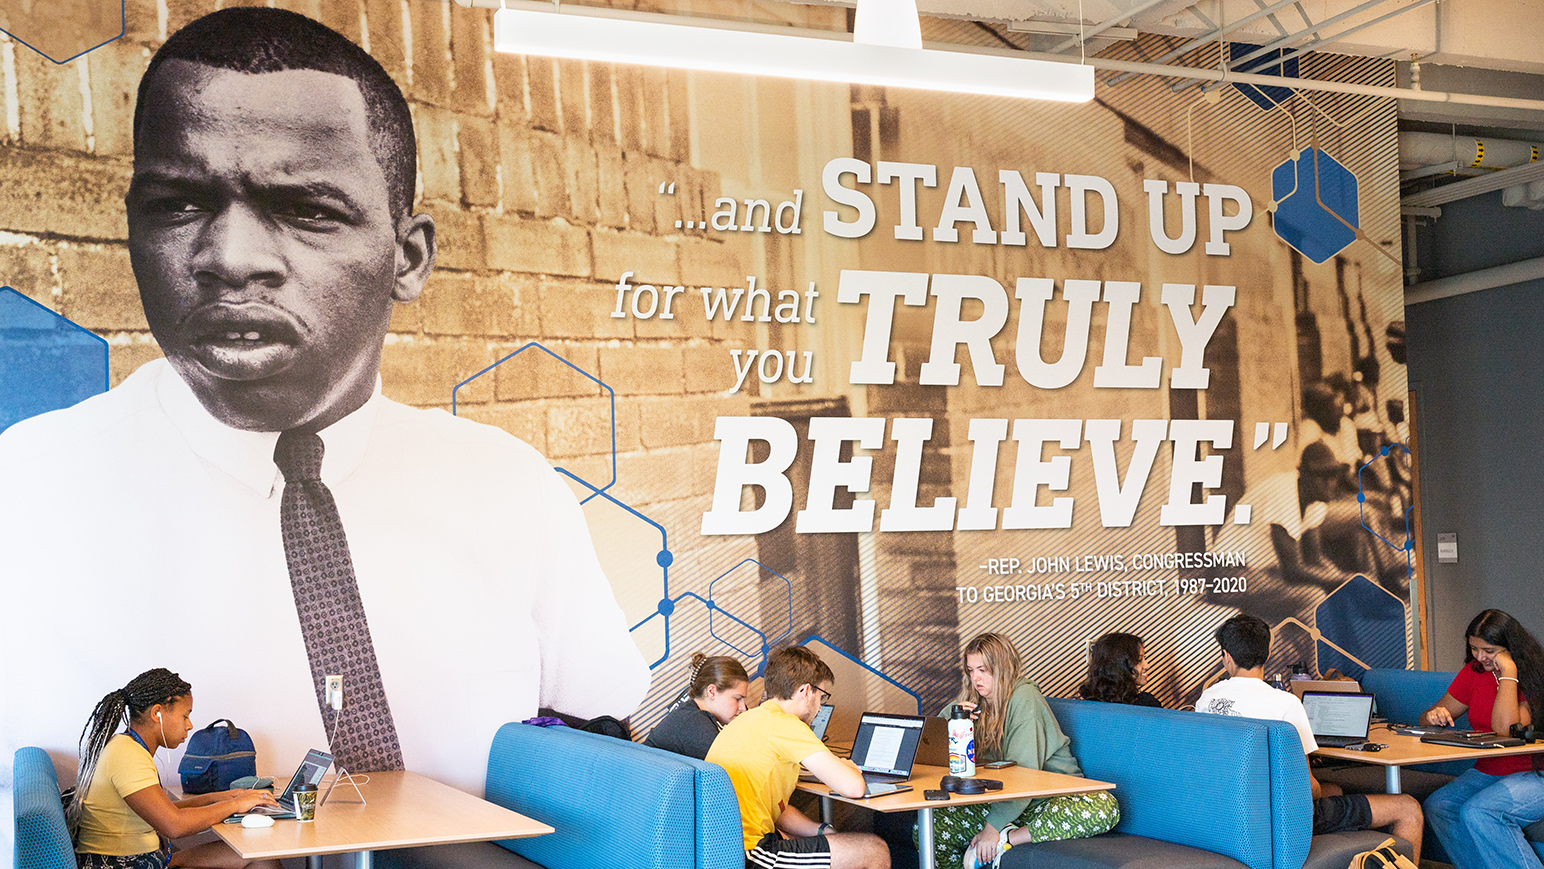 students sit in booths in the student center in front of a mural of John Lewis with text that reads "...and stand up for what you truly believe." - Rep. John Lewis, Congressman to Georgia's 5th district, 1987-2020